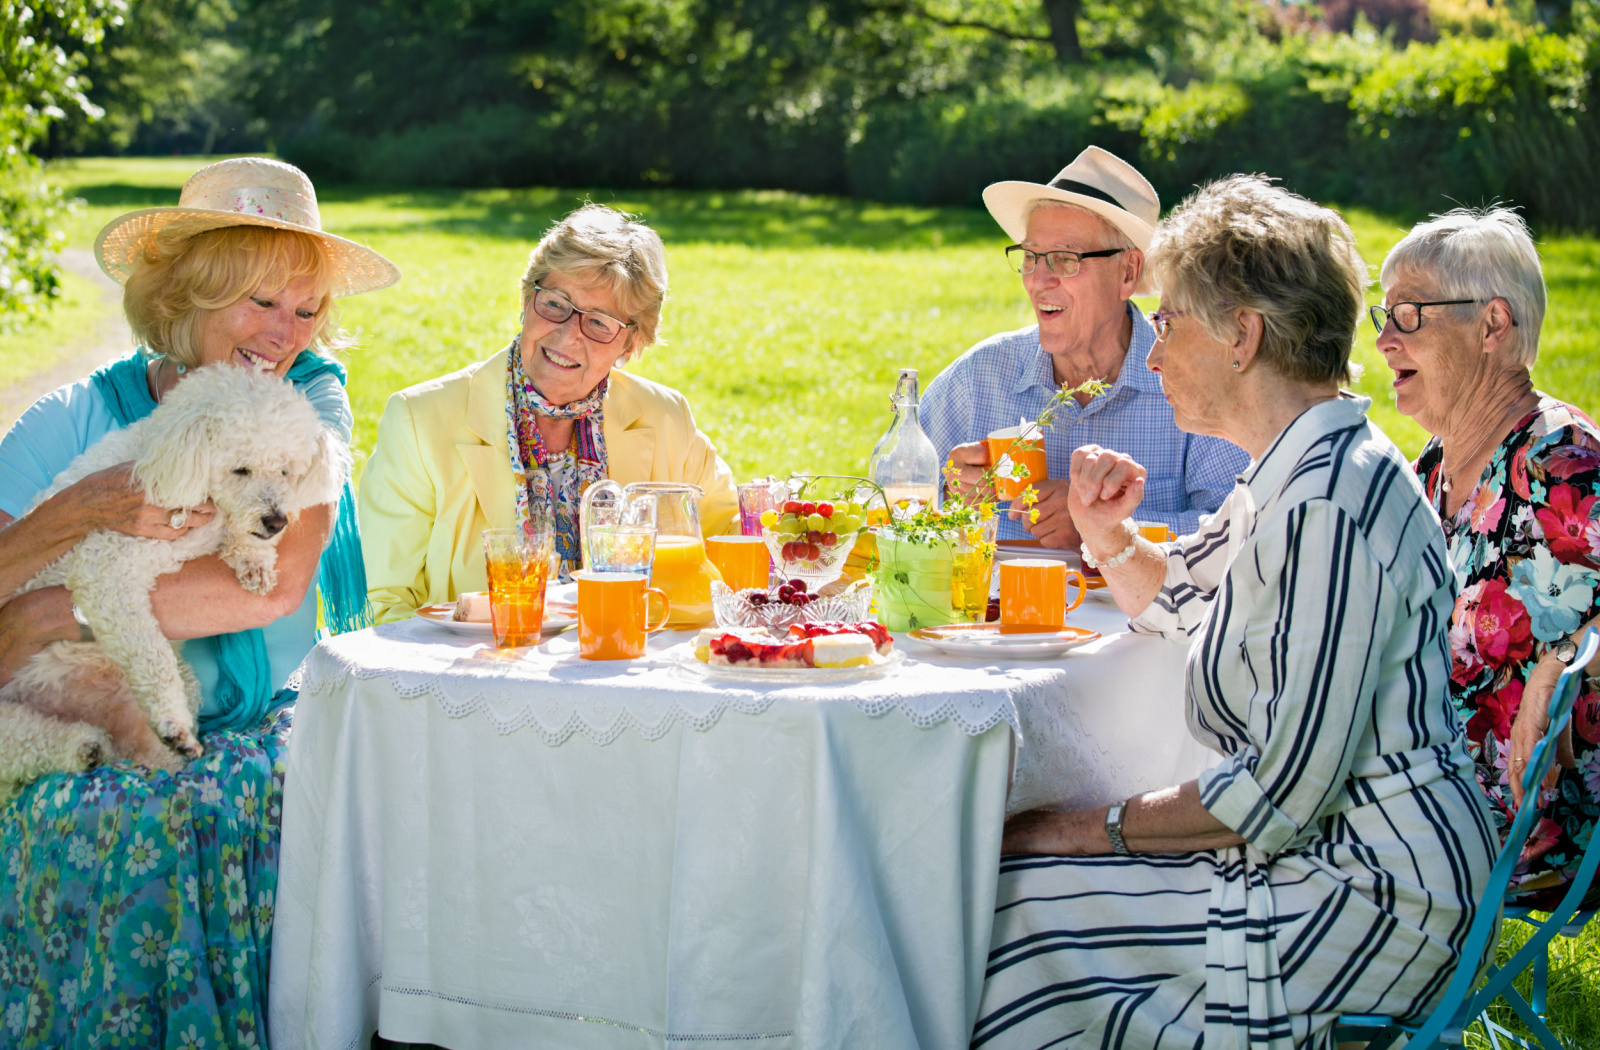 A group of 5 seniors sit around a breakfast table outside, admiring a small Poodle one of them is holding.